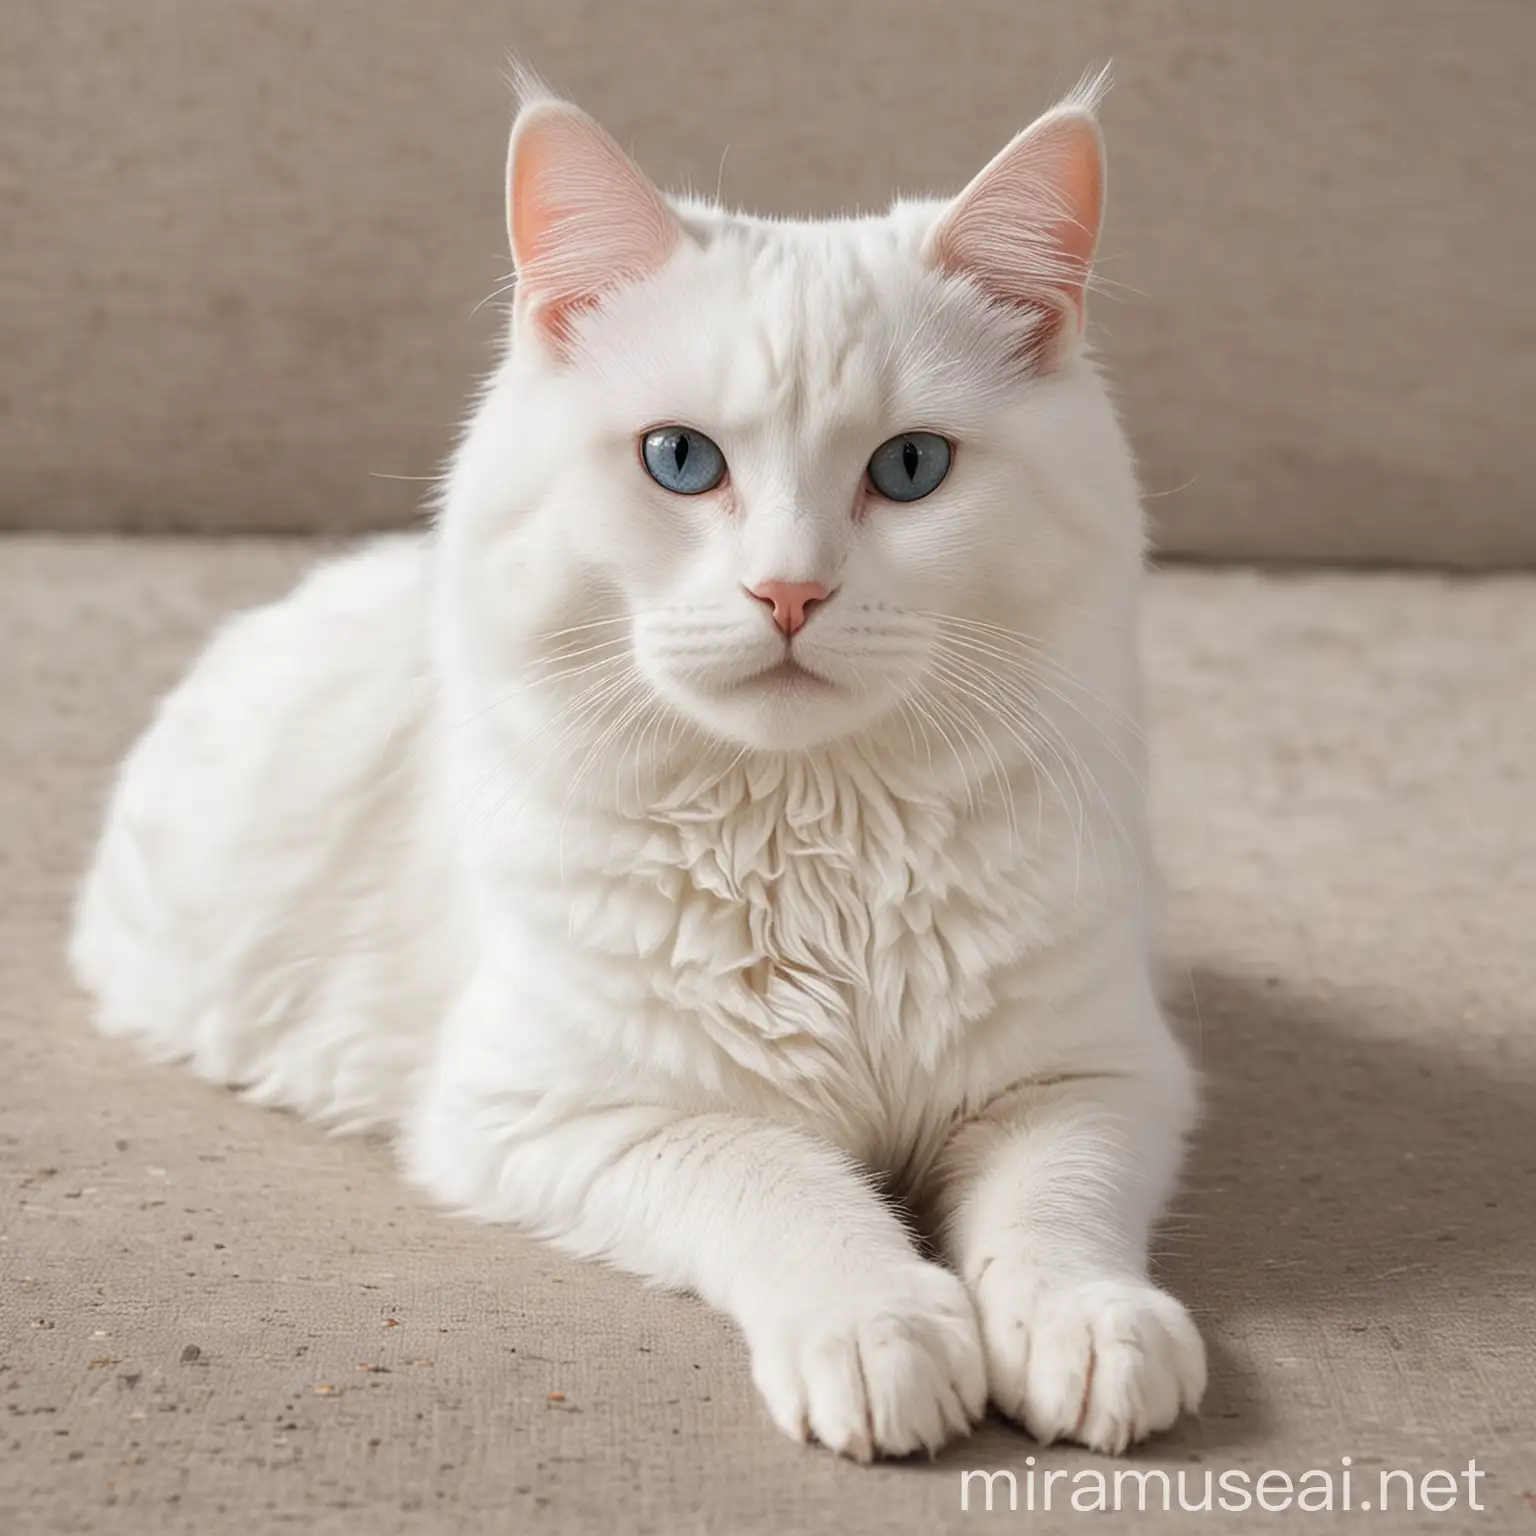 Adorable White Cat Relaxing in a Serene Environment